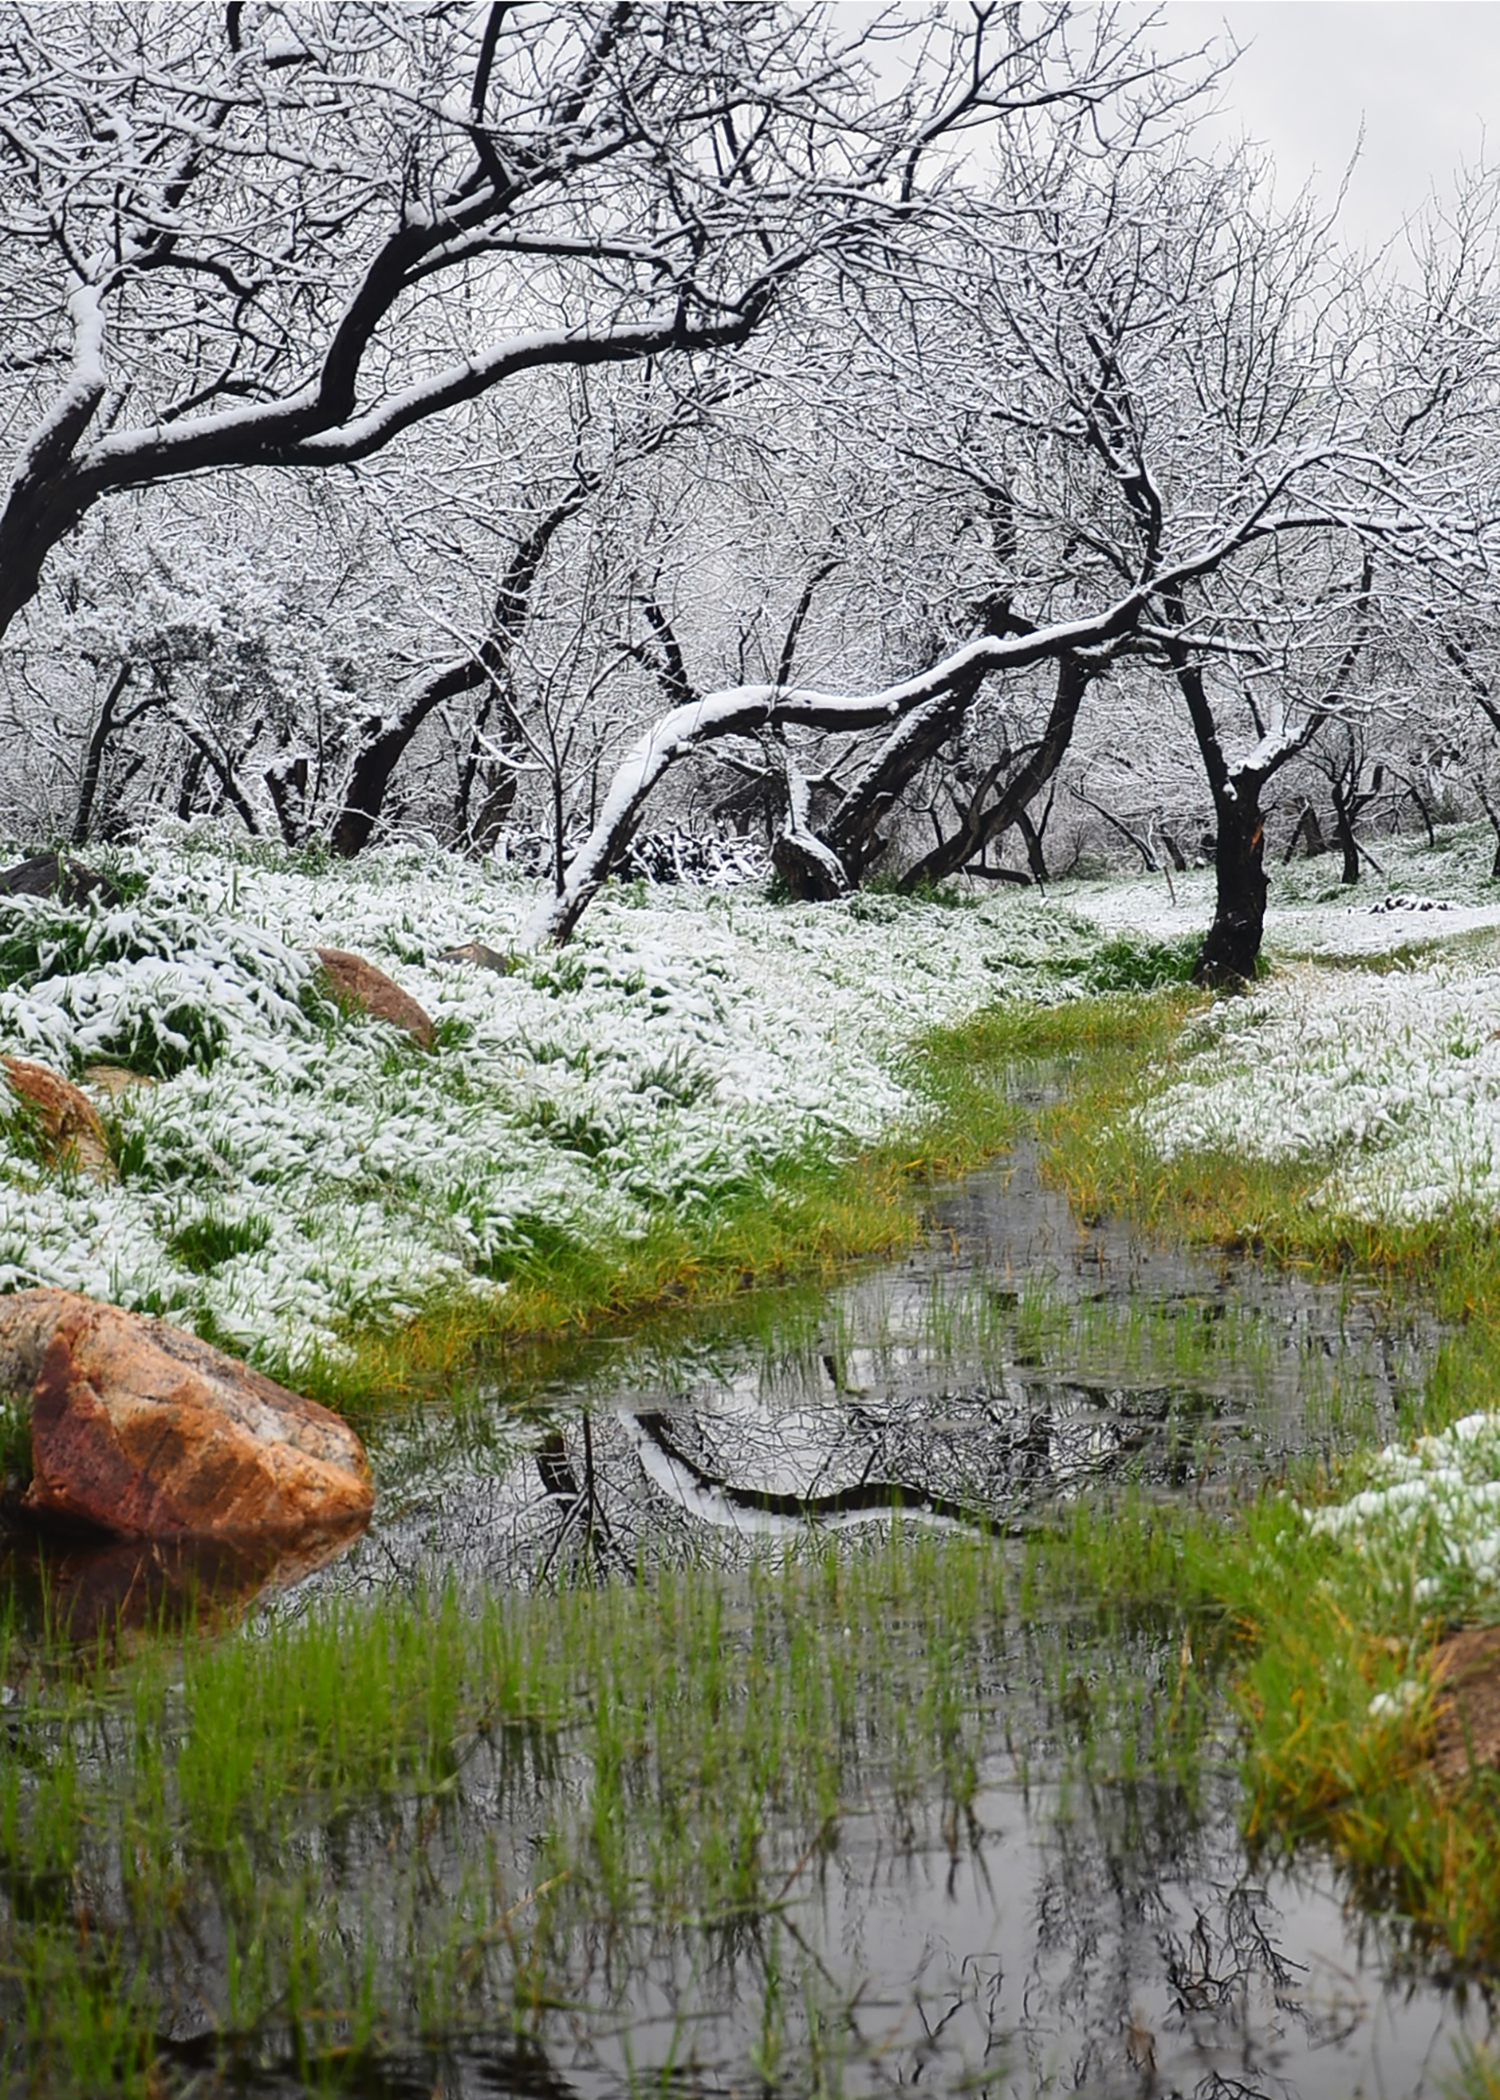 Photo by Arianna DuPont  |  Riparian area just after a rare March snowfall in Sabino Creek